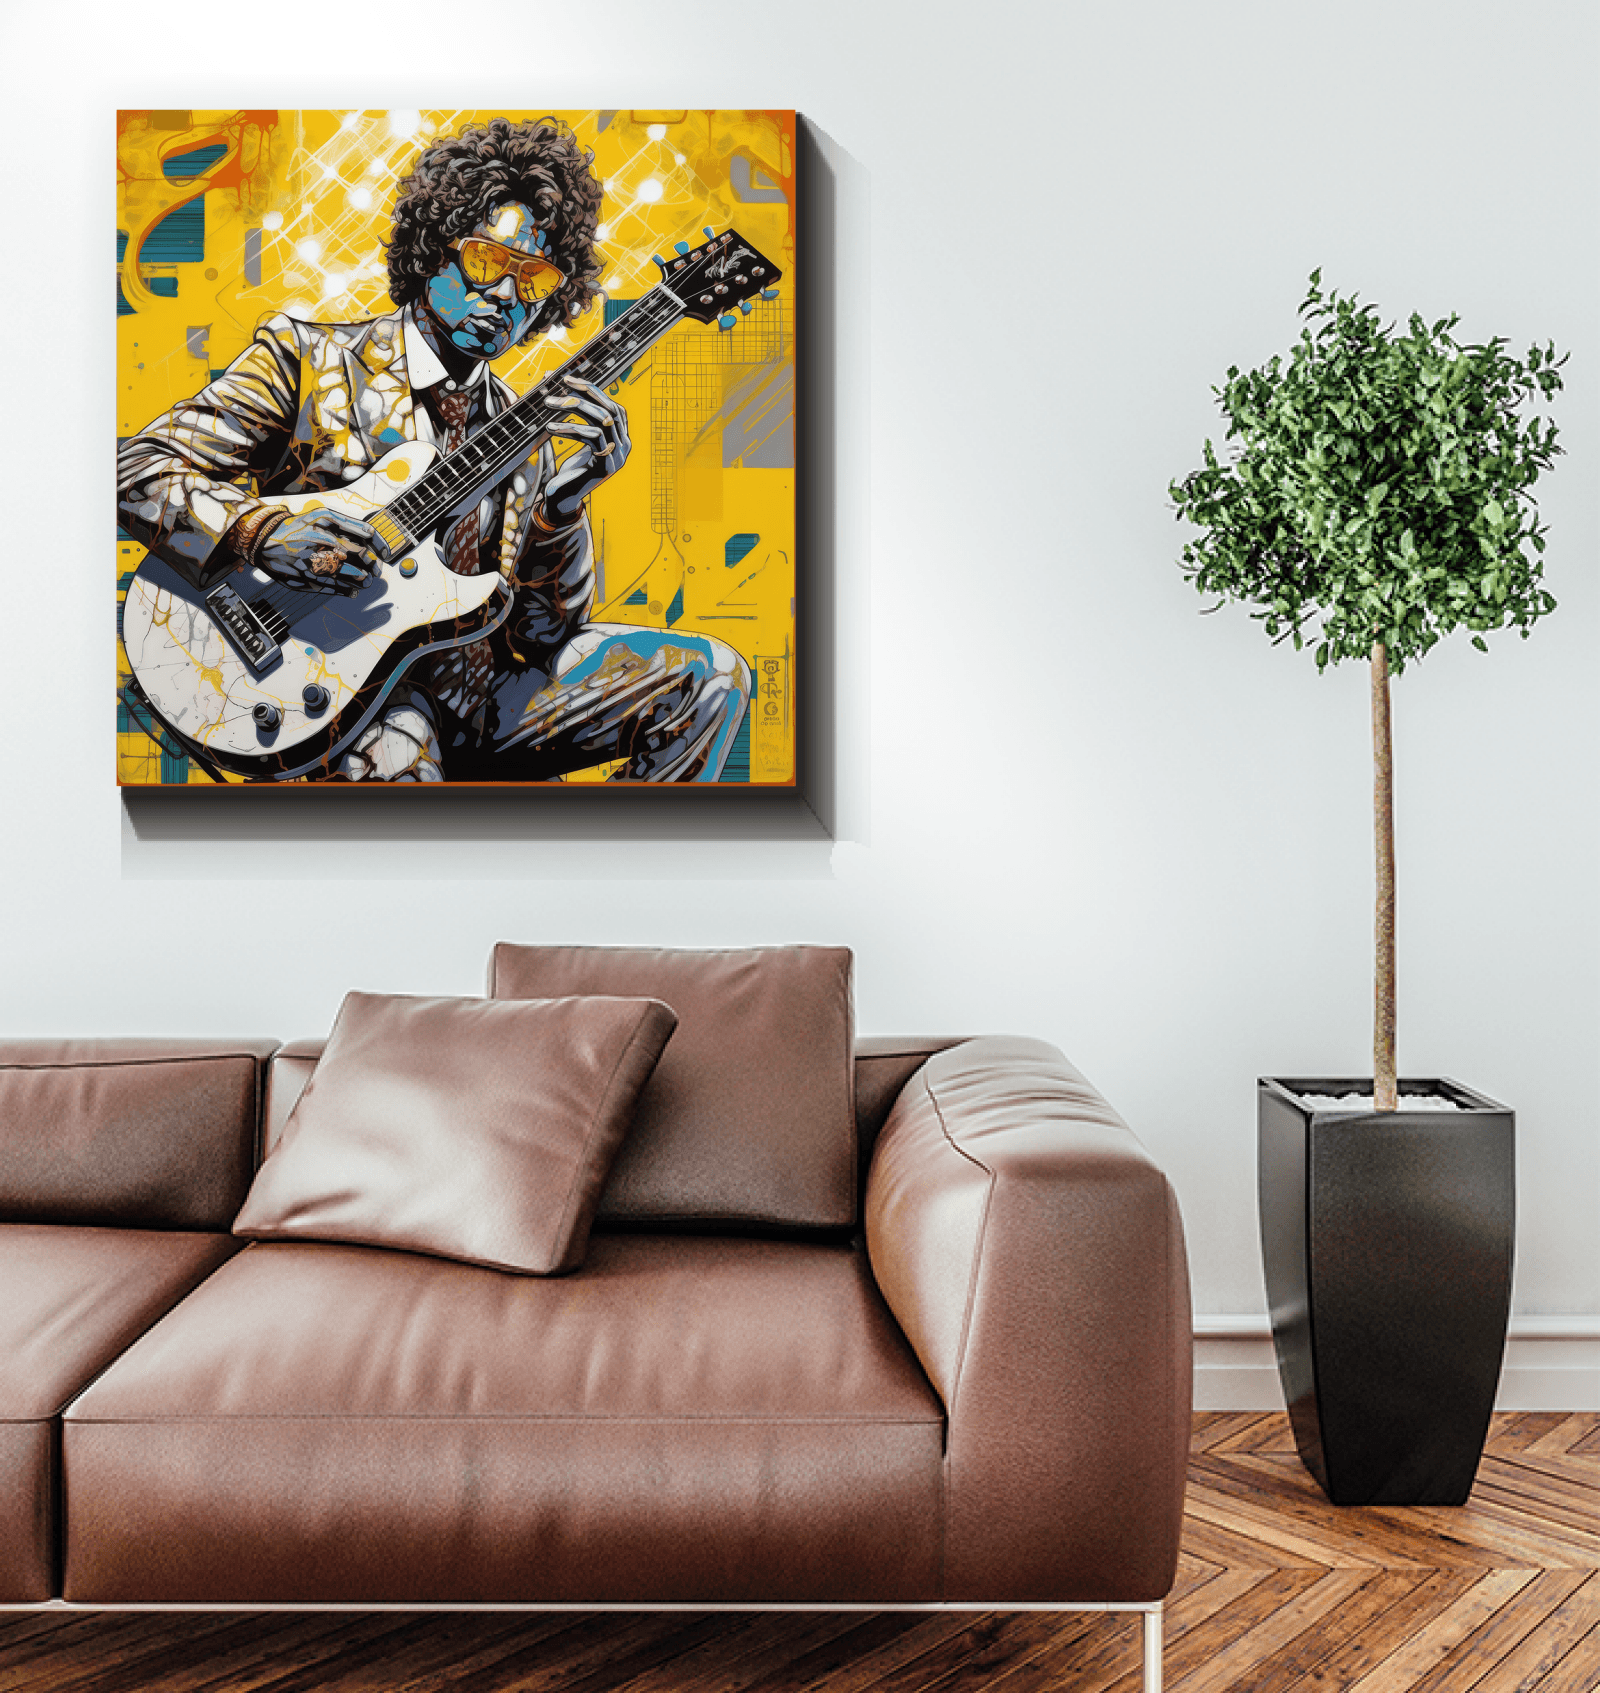 Elegant Canvas Art of Instruments for Pop Music Lovers.